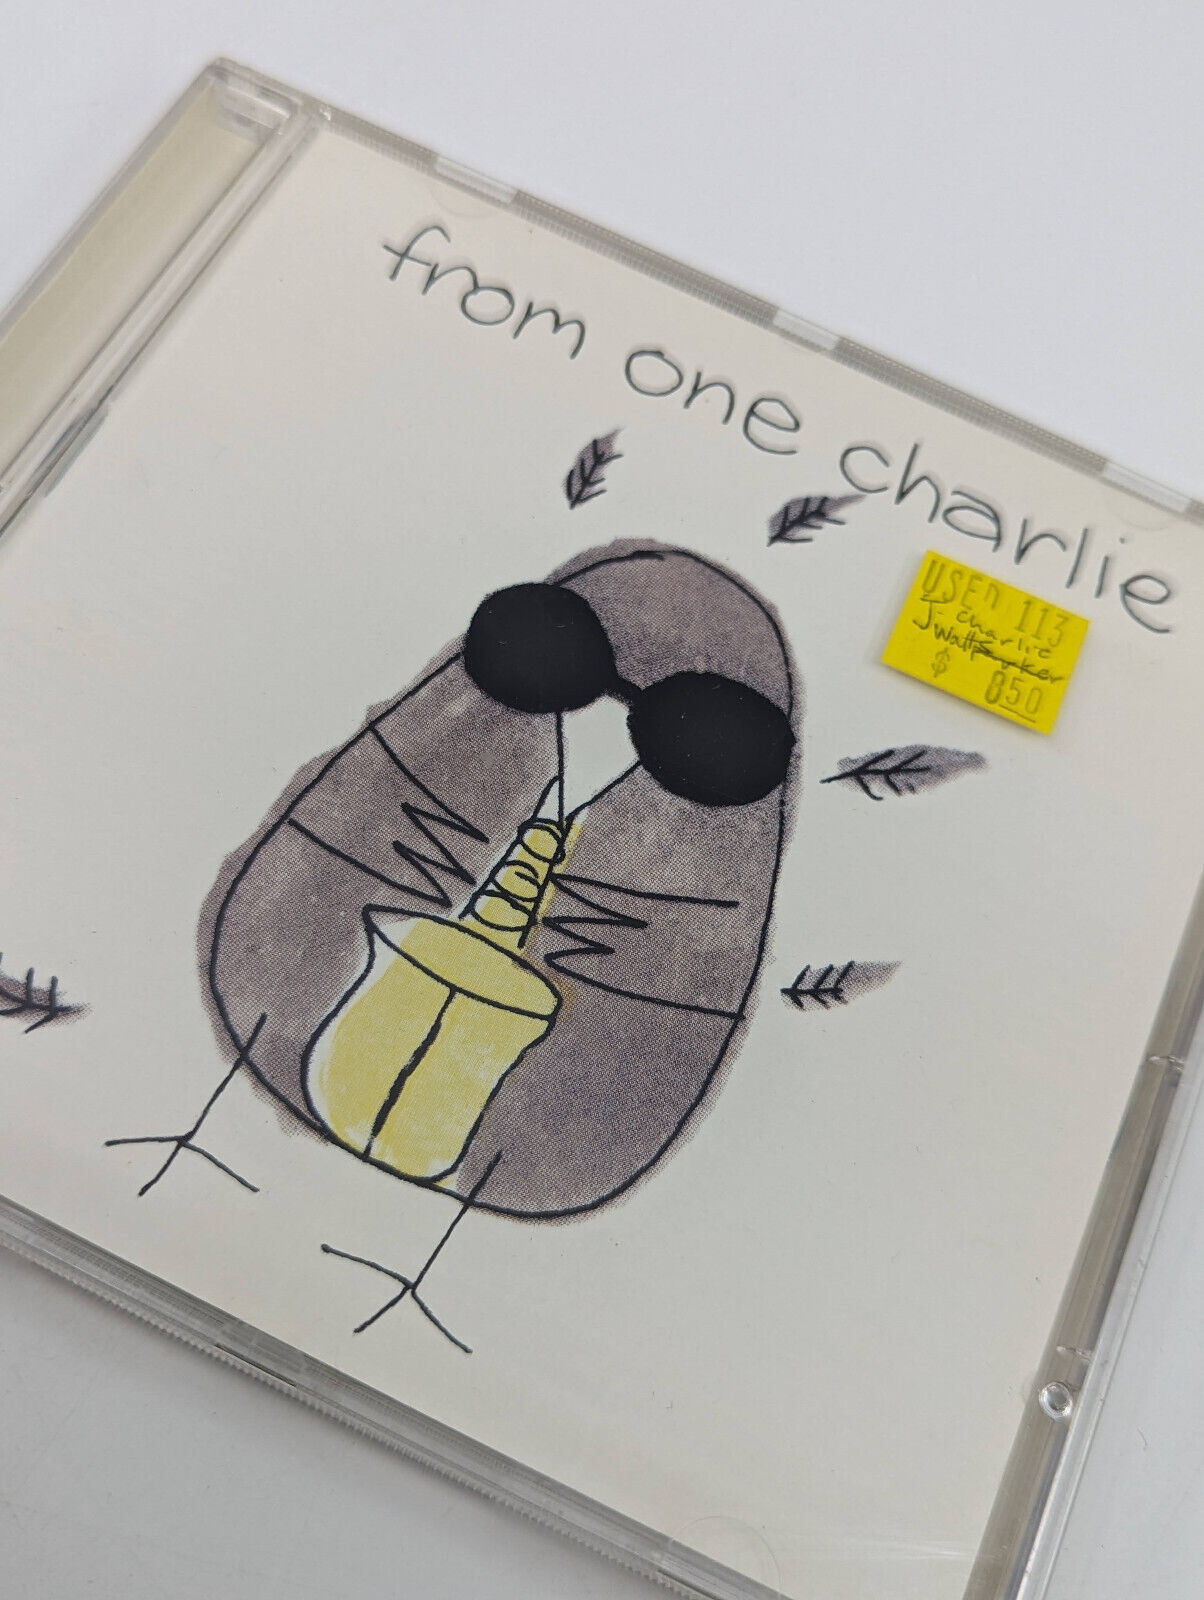 Charlie Watts FROM ONE CHARLIE 1991 JAZZ CD